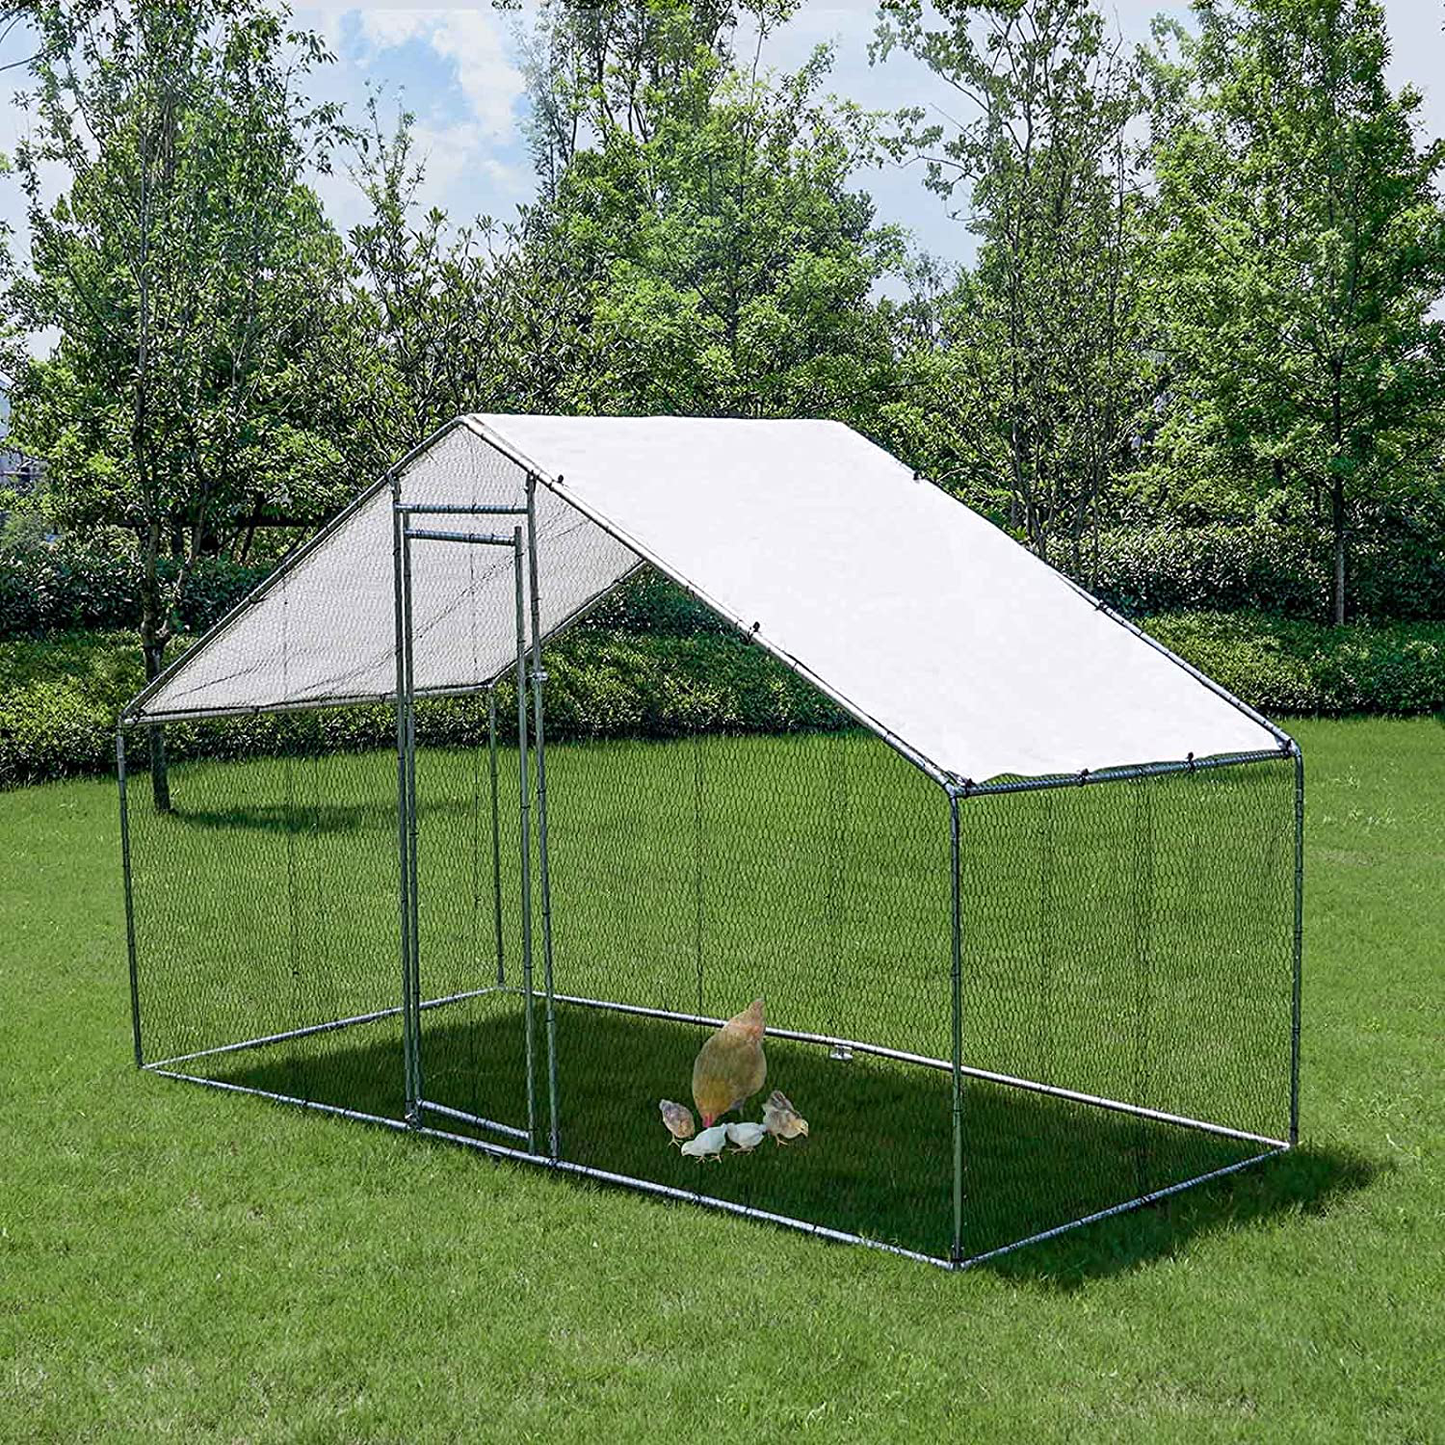 Chicken Coop, Large Metal Chicken Coop Walk in Poultry Cage Hen Run House Rabbits Cage with Waterproof & Anti-Uv Cover, Galvanized Steel Coops for Outdoor Backyard Farm Garden Animals & Pet Supplies > Pet Supplies > Dog Supplies > Dog Kennels & Runs JOIONE 9.8'L x 6.5'W x 6.5'H  